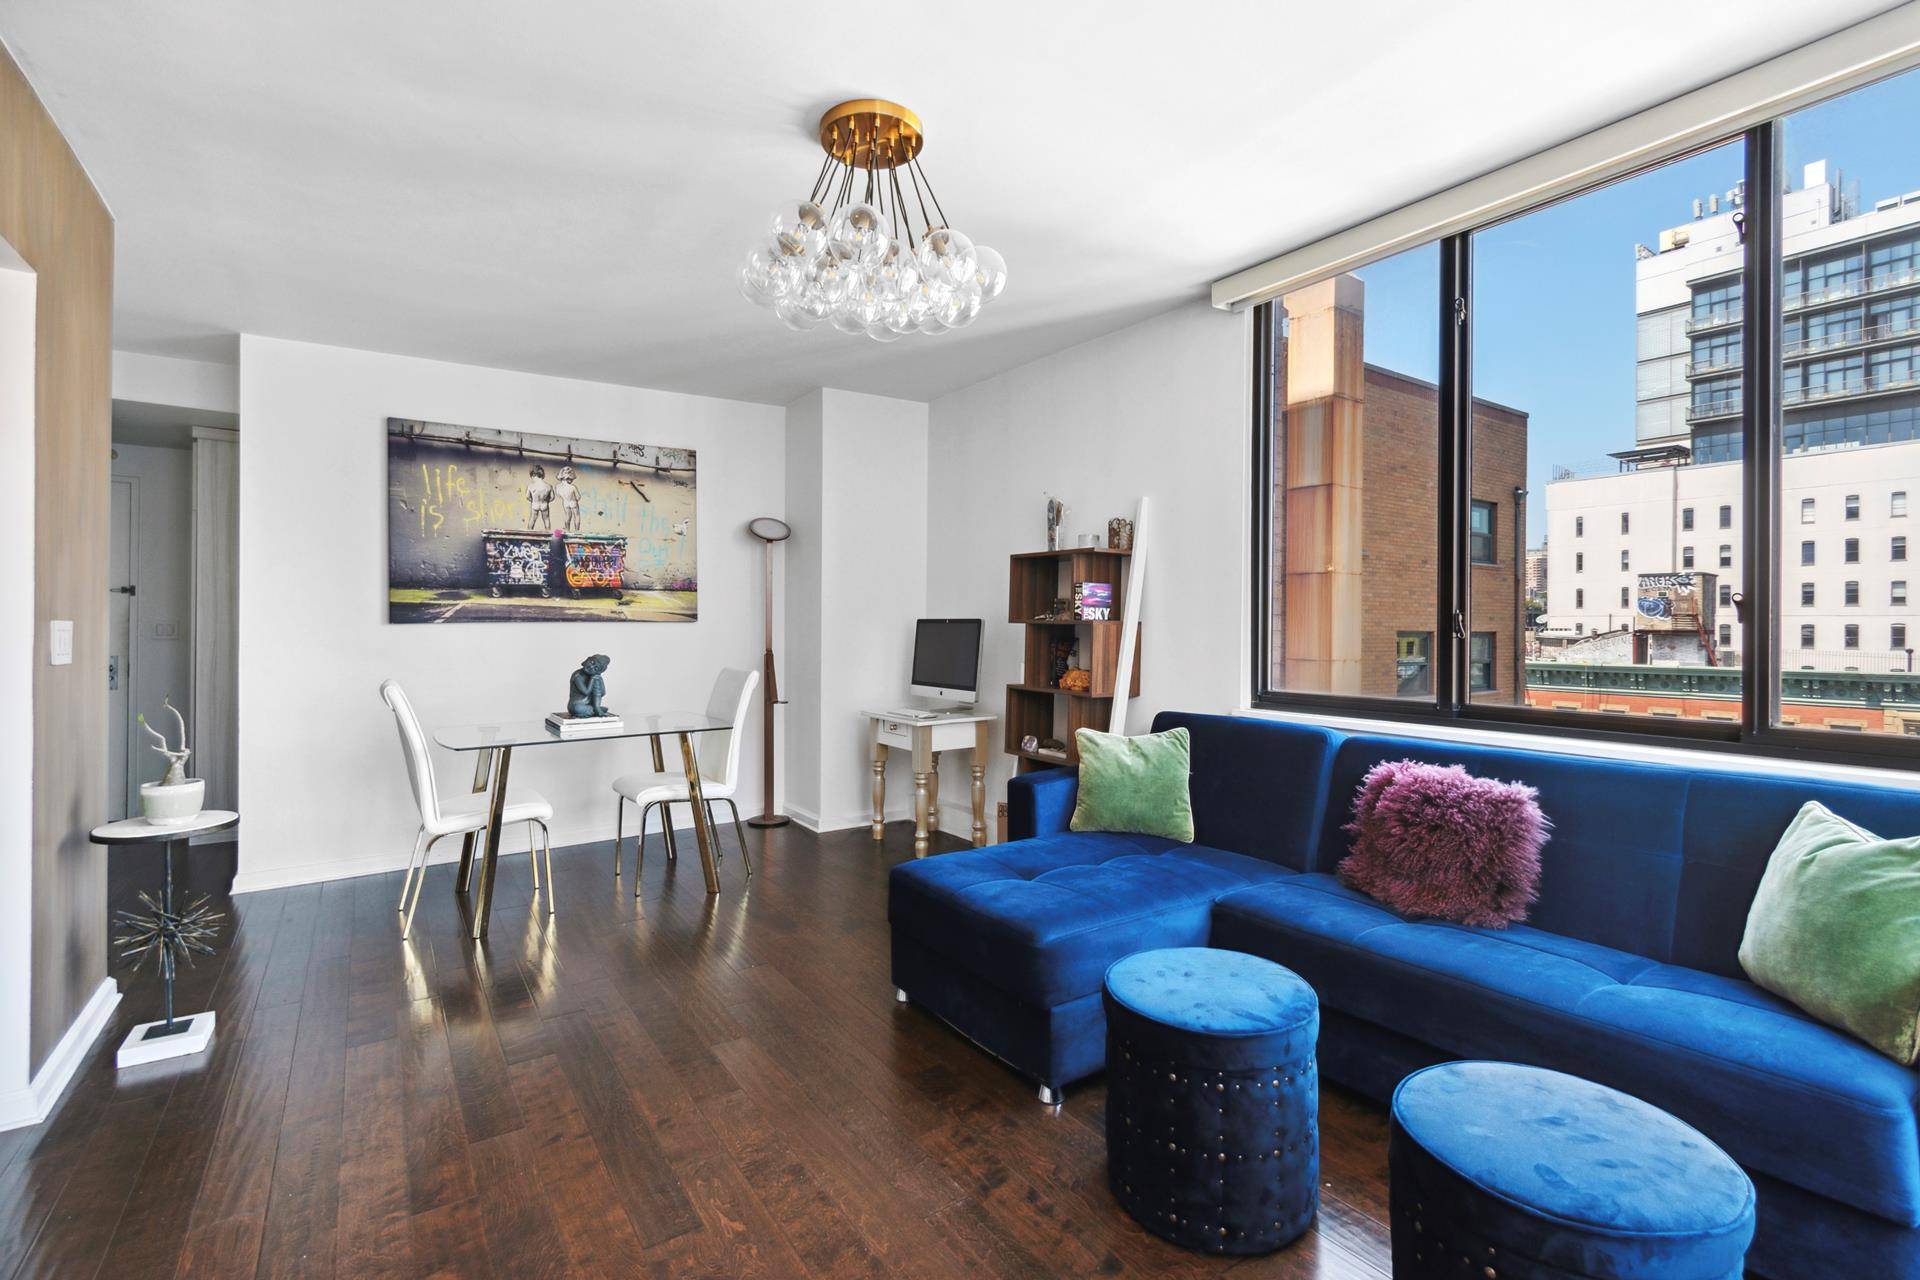 Located in the beloved full service Nolita Place Condominium, where Spring Street meets the Bowery at the nexus of Nolita and the Lower East Side, this rarely available, renovated corner ...